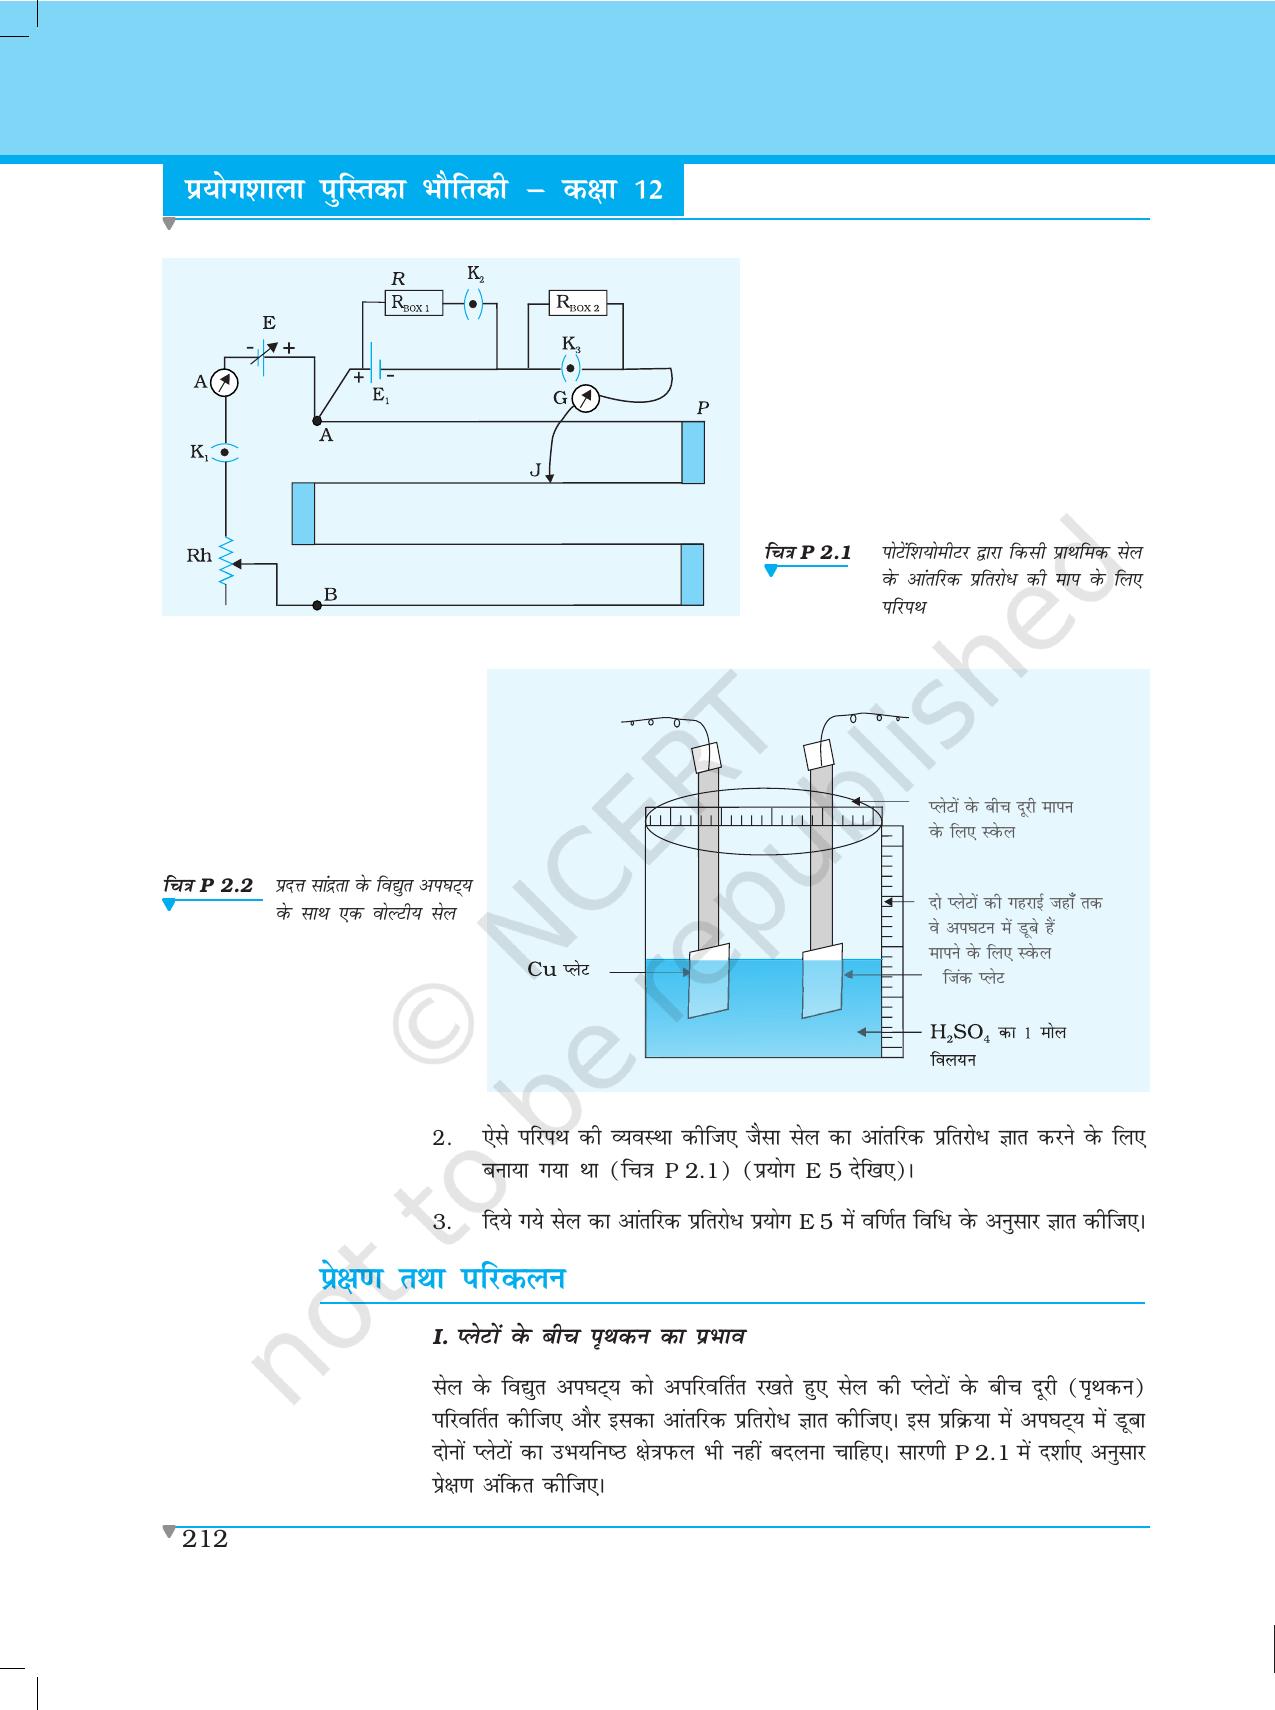 NCERT Laboratory Manuals for Class XII भौतिकी - परियोजना (1 - 7) - Page 6